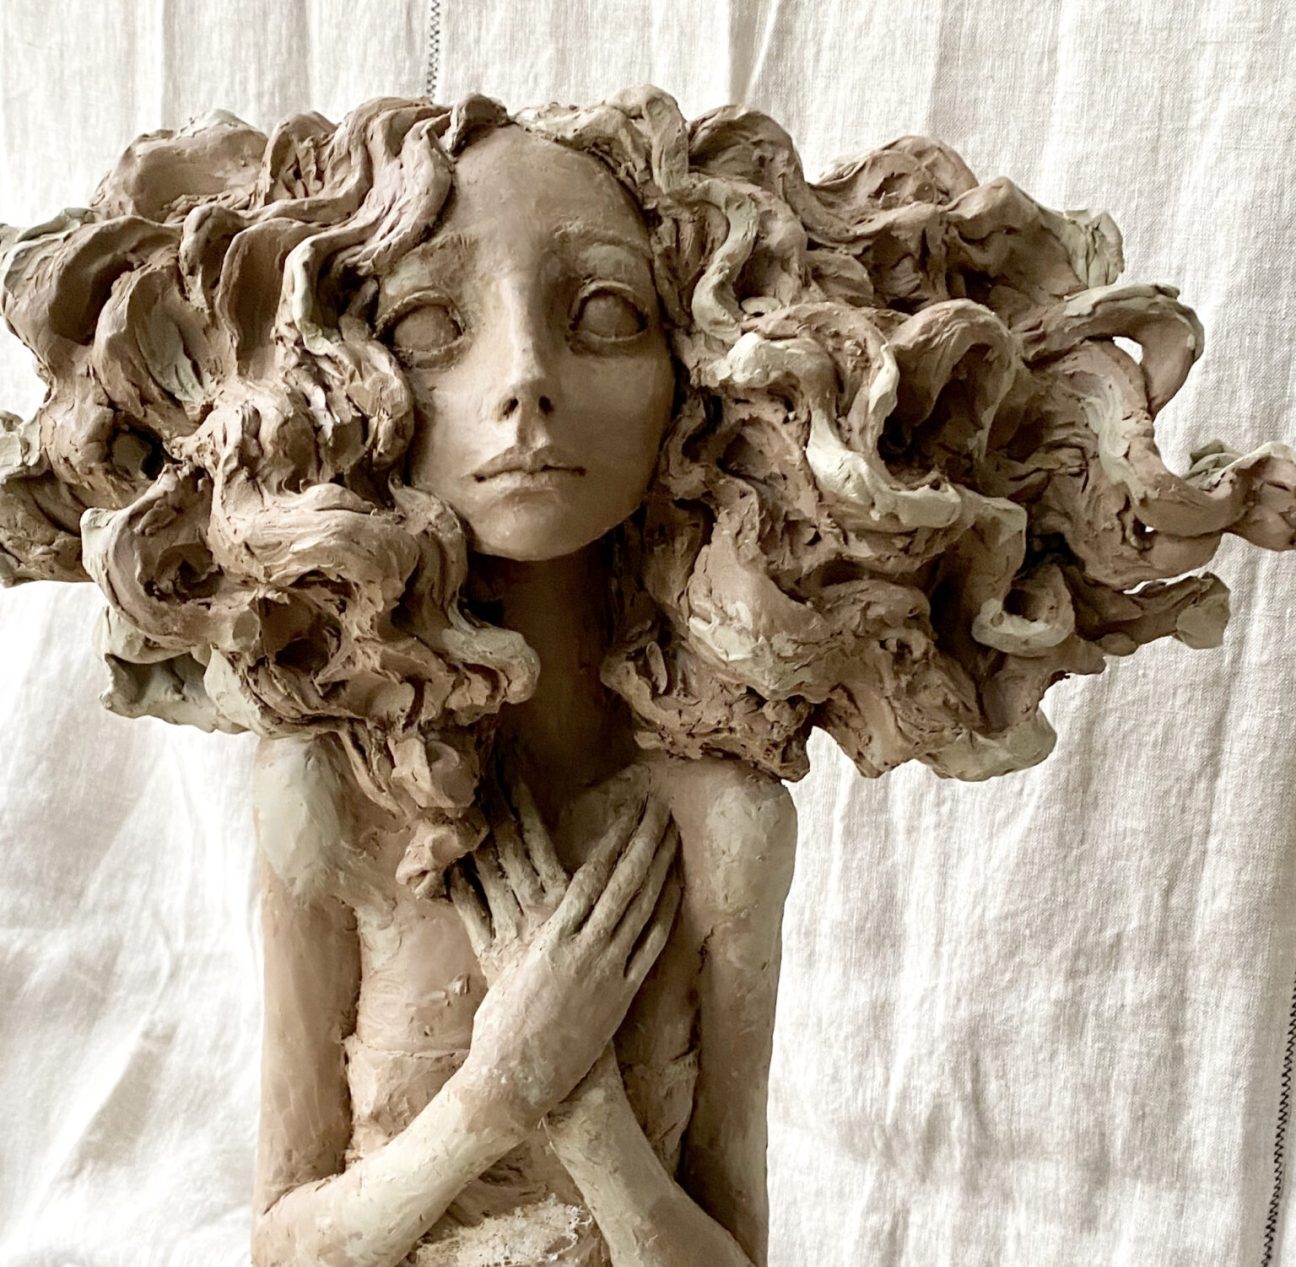 Valérie Hadida. Detail of “Eternel Amour” (2018), bronze, 75 x 30 x 30 centimeters